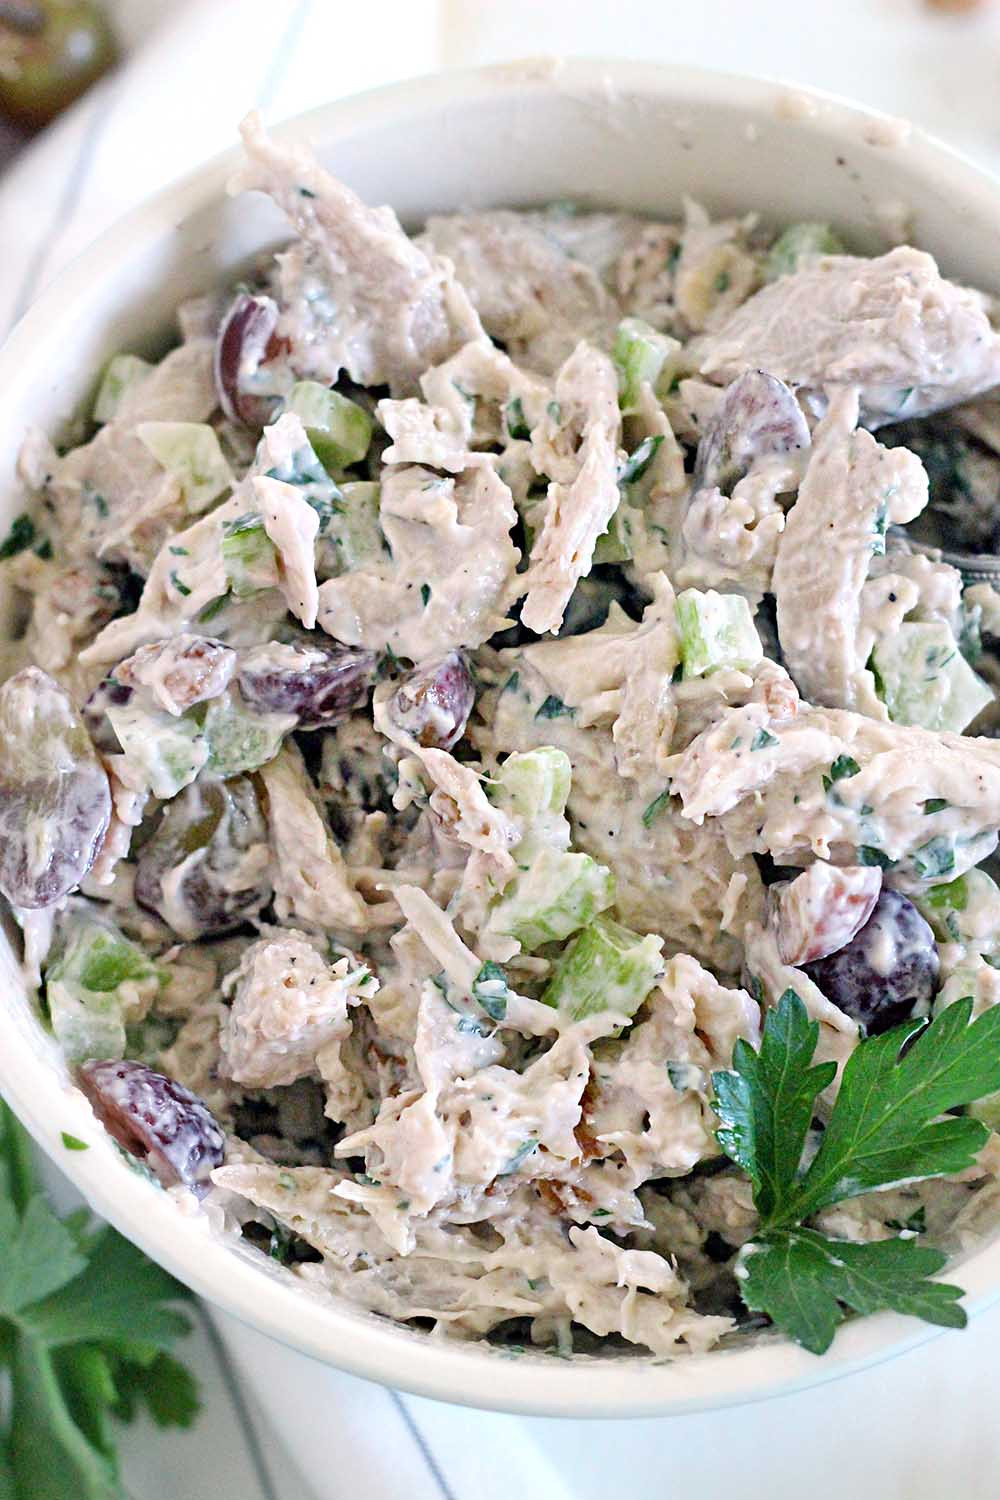 Chicken Salad With Grapes And Walnuts
 Awesome Chicken Salad with grapes and walnuts